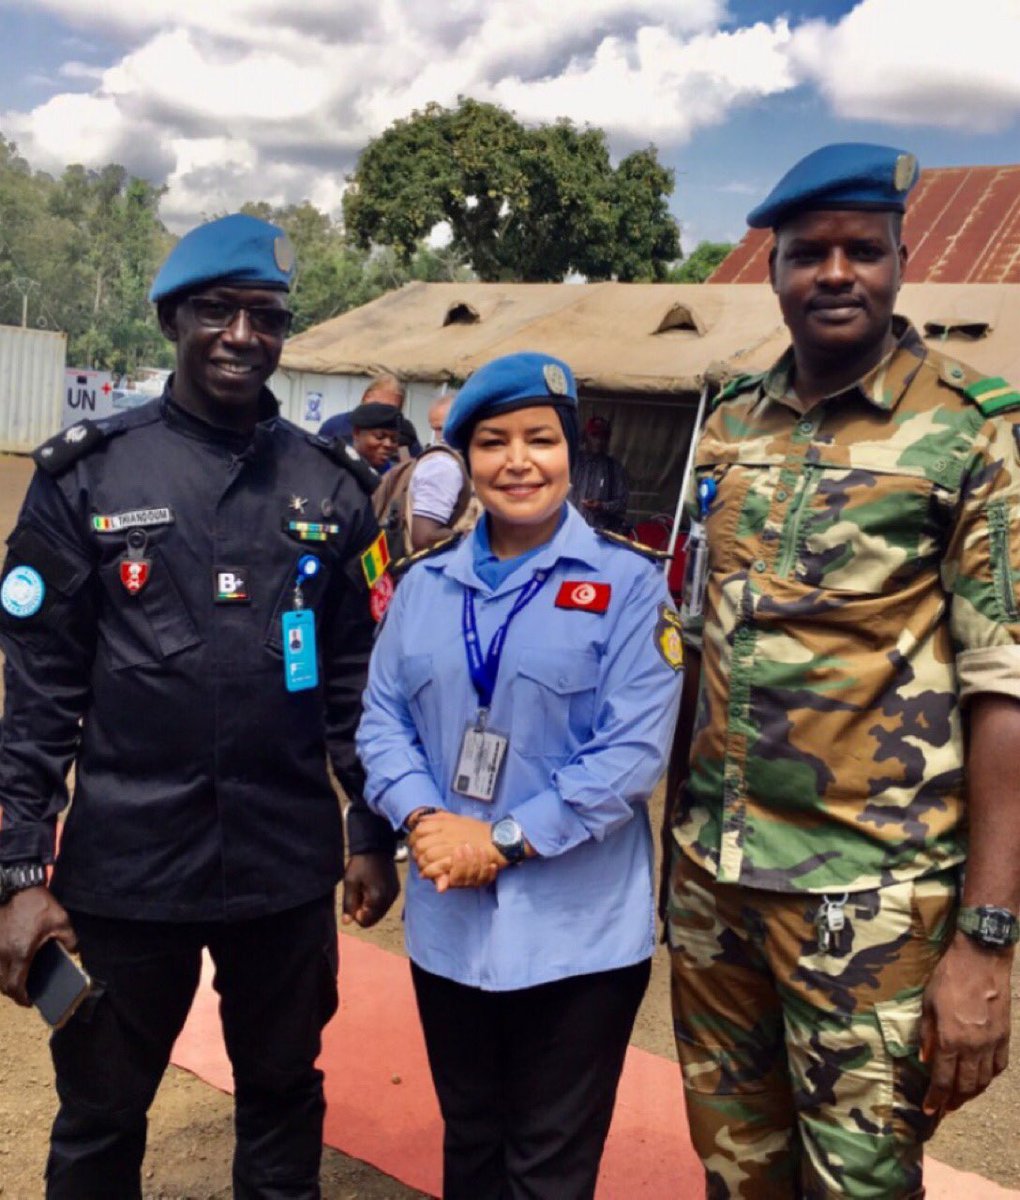 Honored to participate in peacekeeping missions #PKDay #PK75